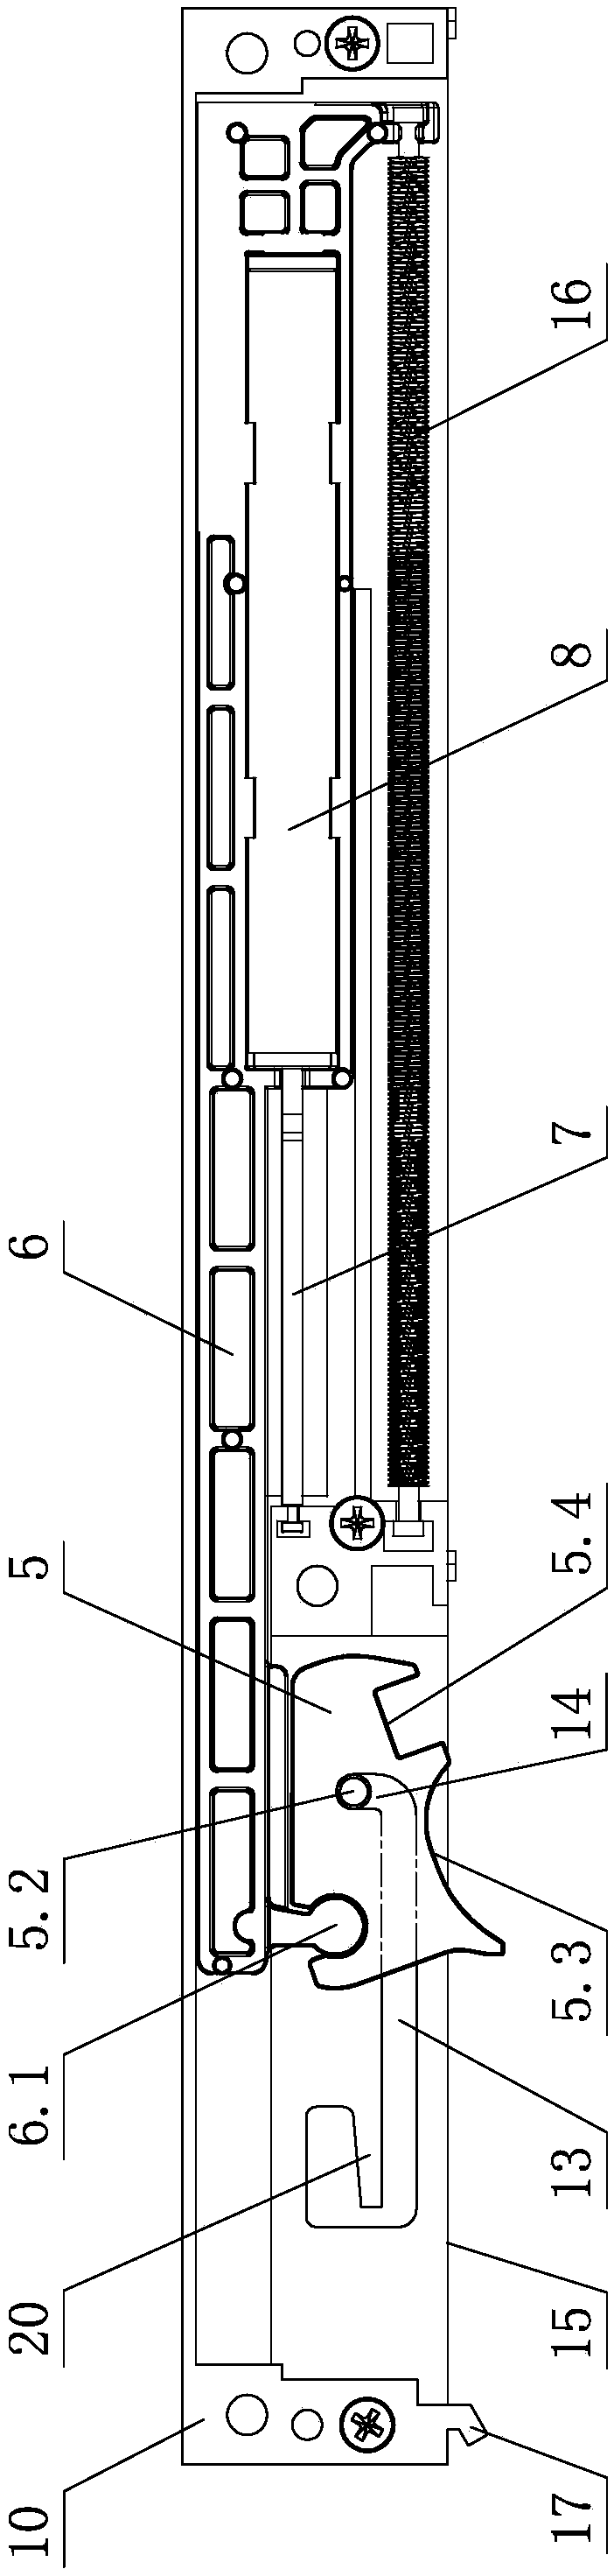 A damping buffer structure for a drawer slide rail